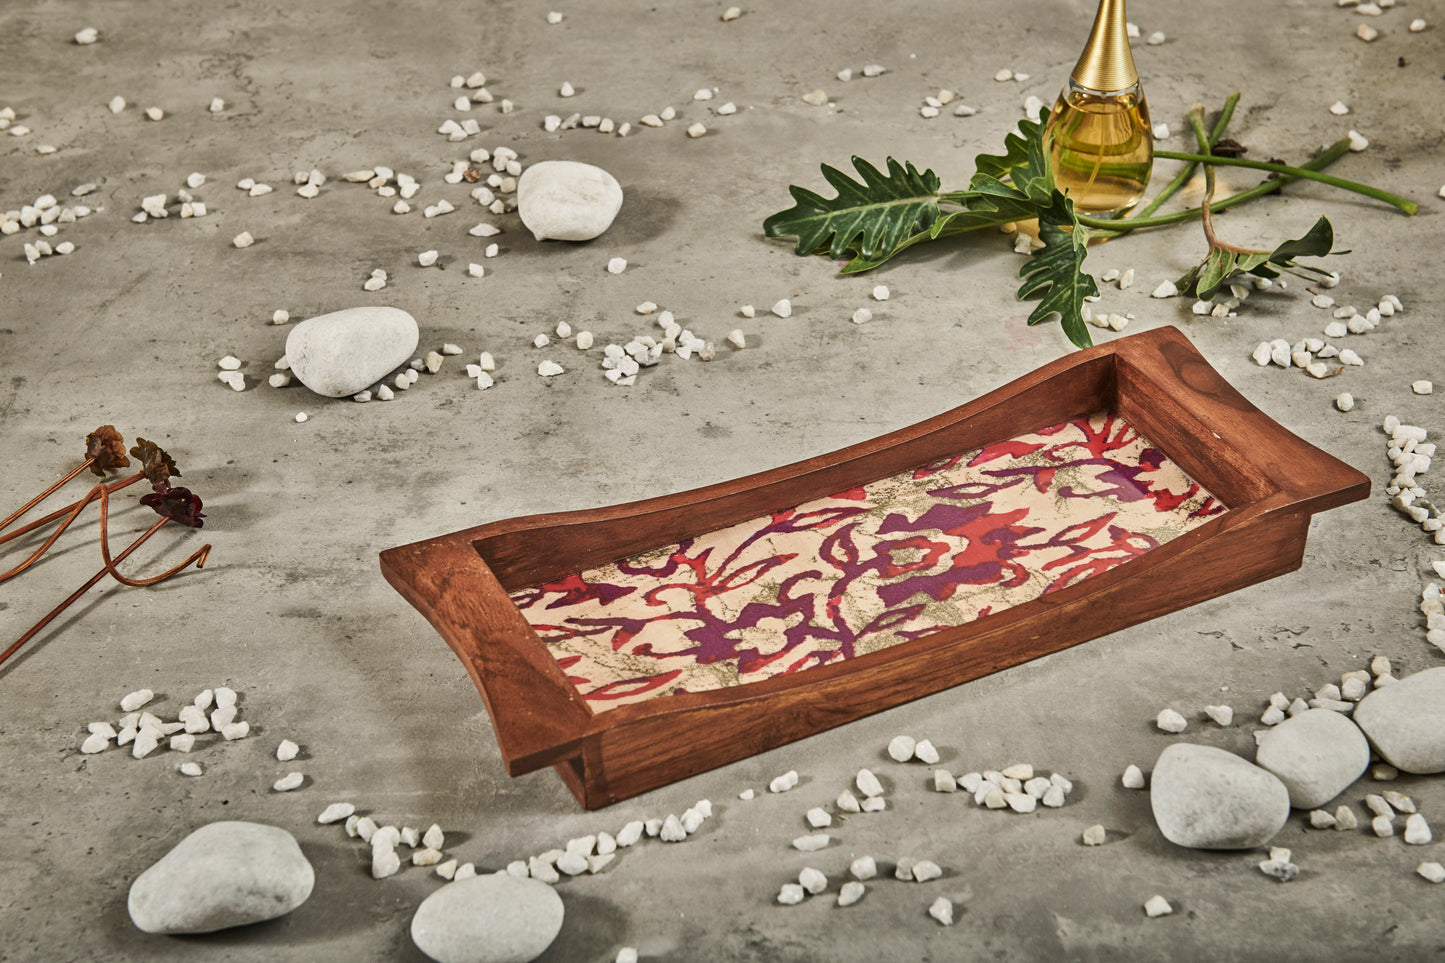 A Tiny Mistake Purple and Pink Floral Pattern Boat Shaped Teak Serving Tray, Tray for Serving Tea and Snacks, 35 x 15 x 4 cm